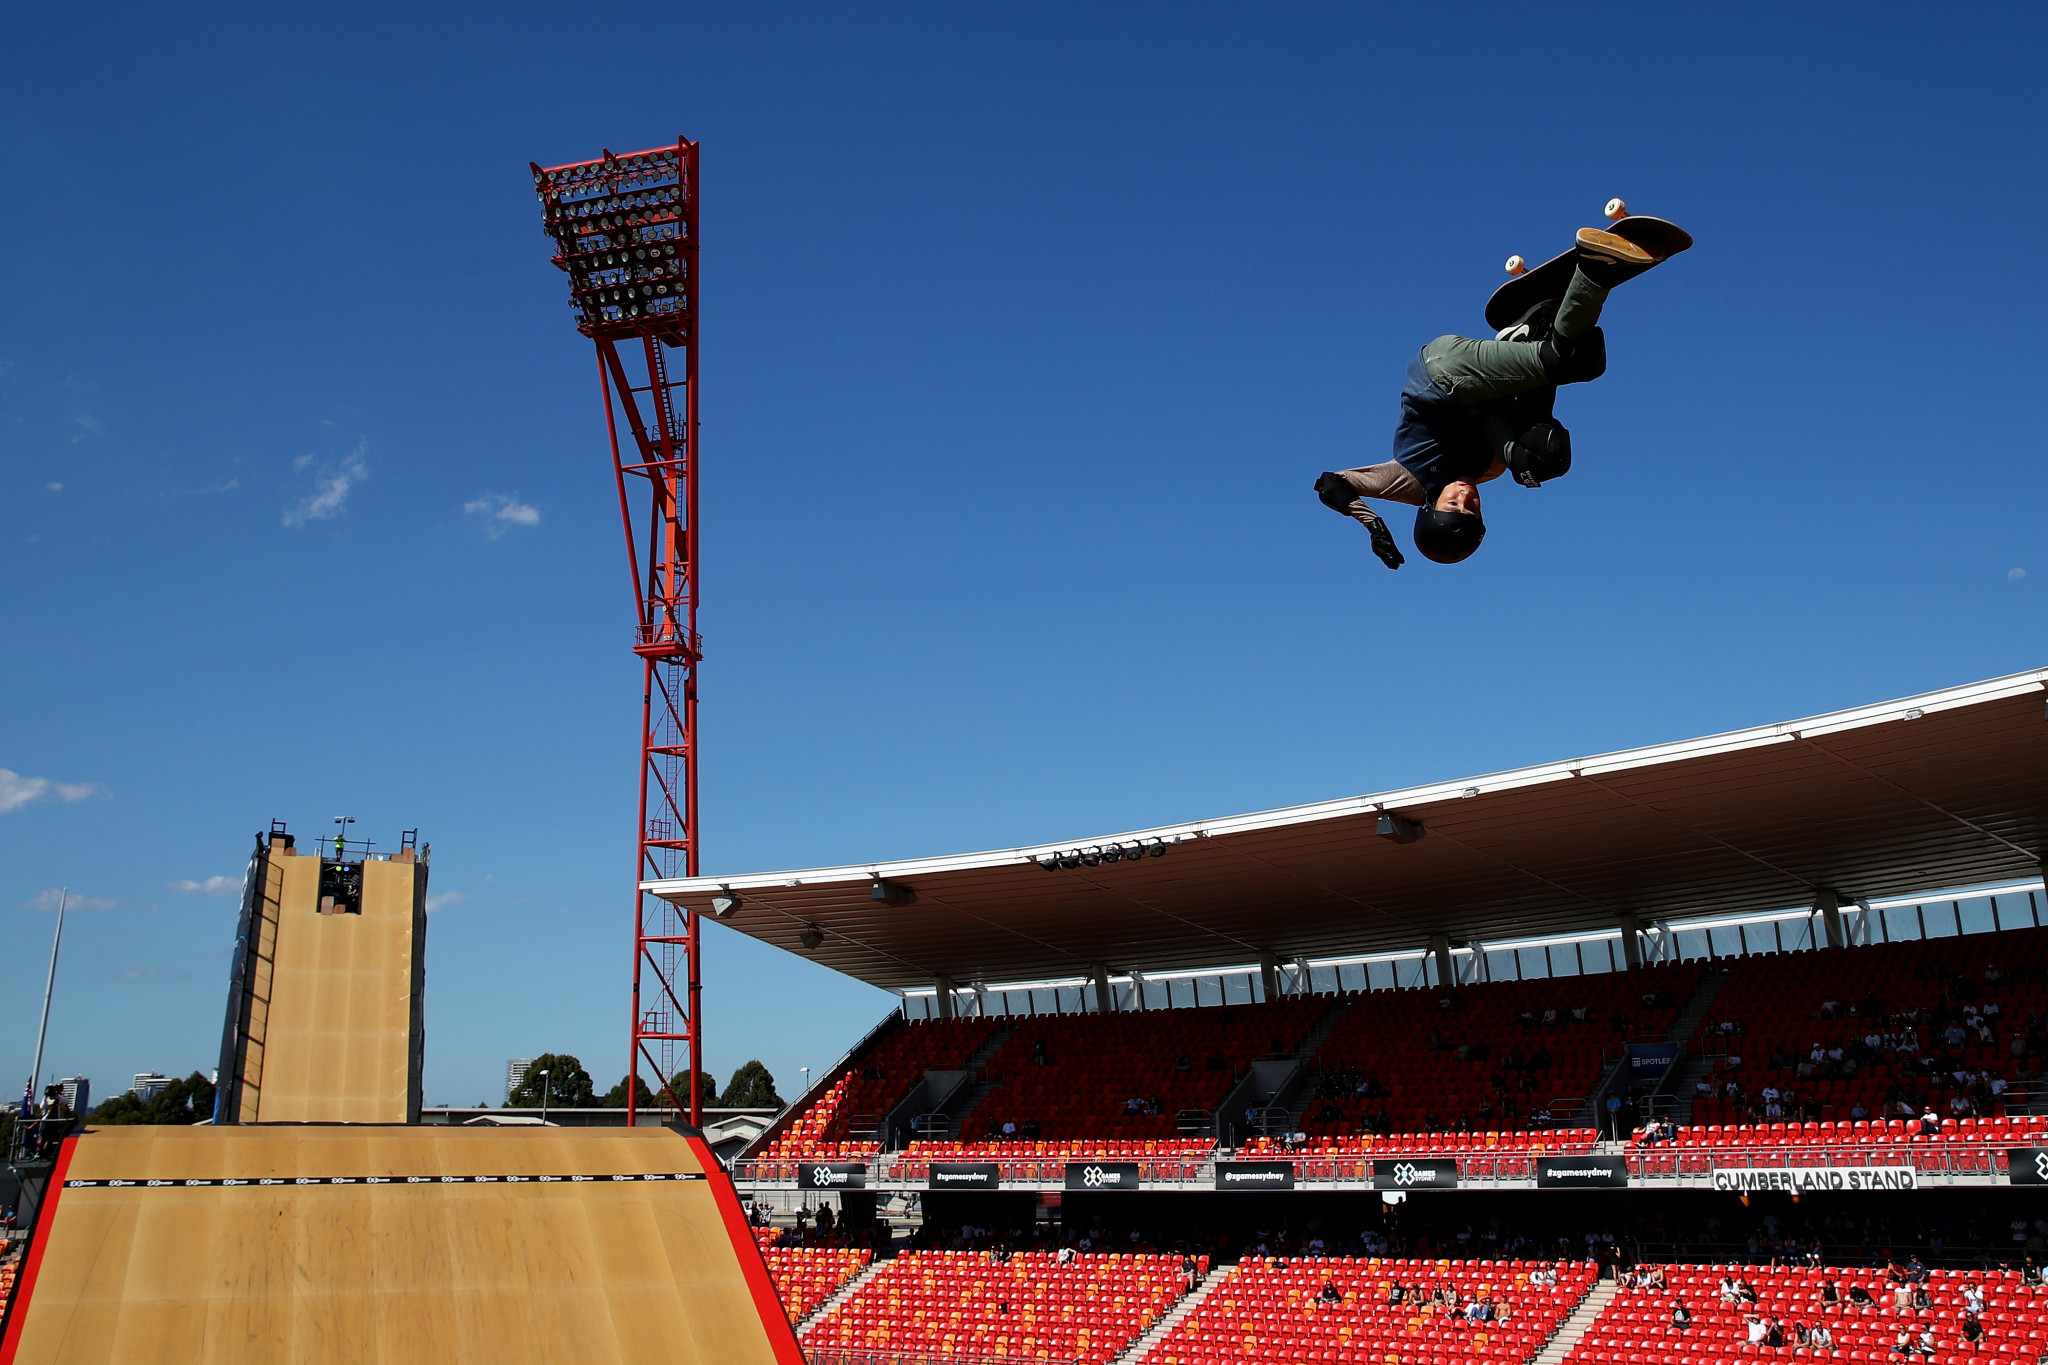 Skateboarding will make its debut on the Olympic programme at Tokyo 2020 ©Getty Images